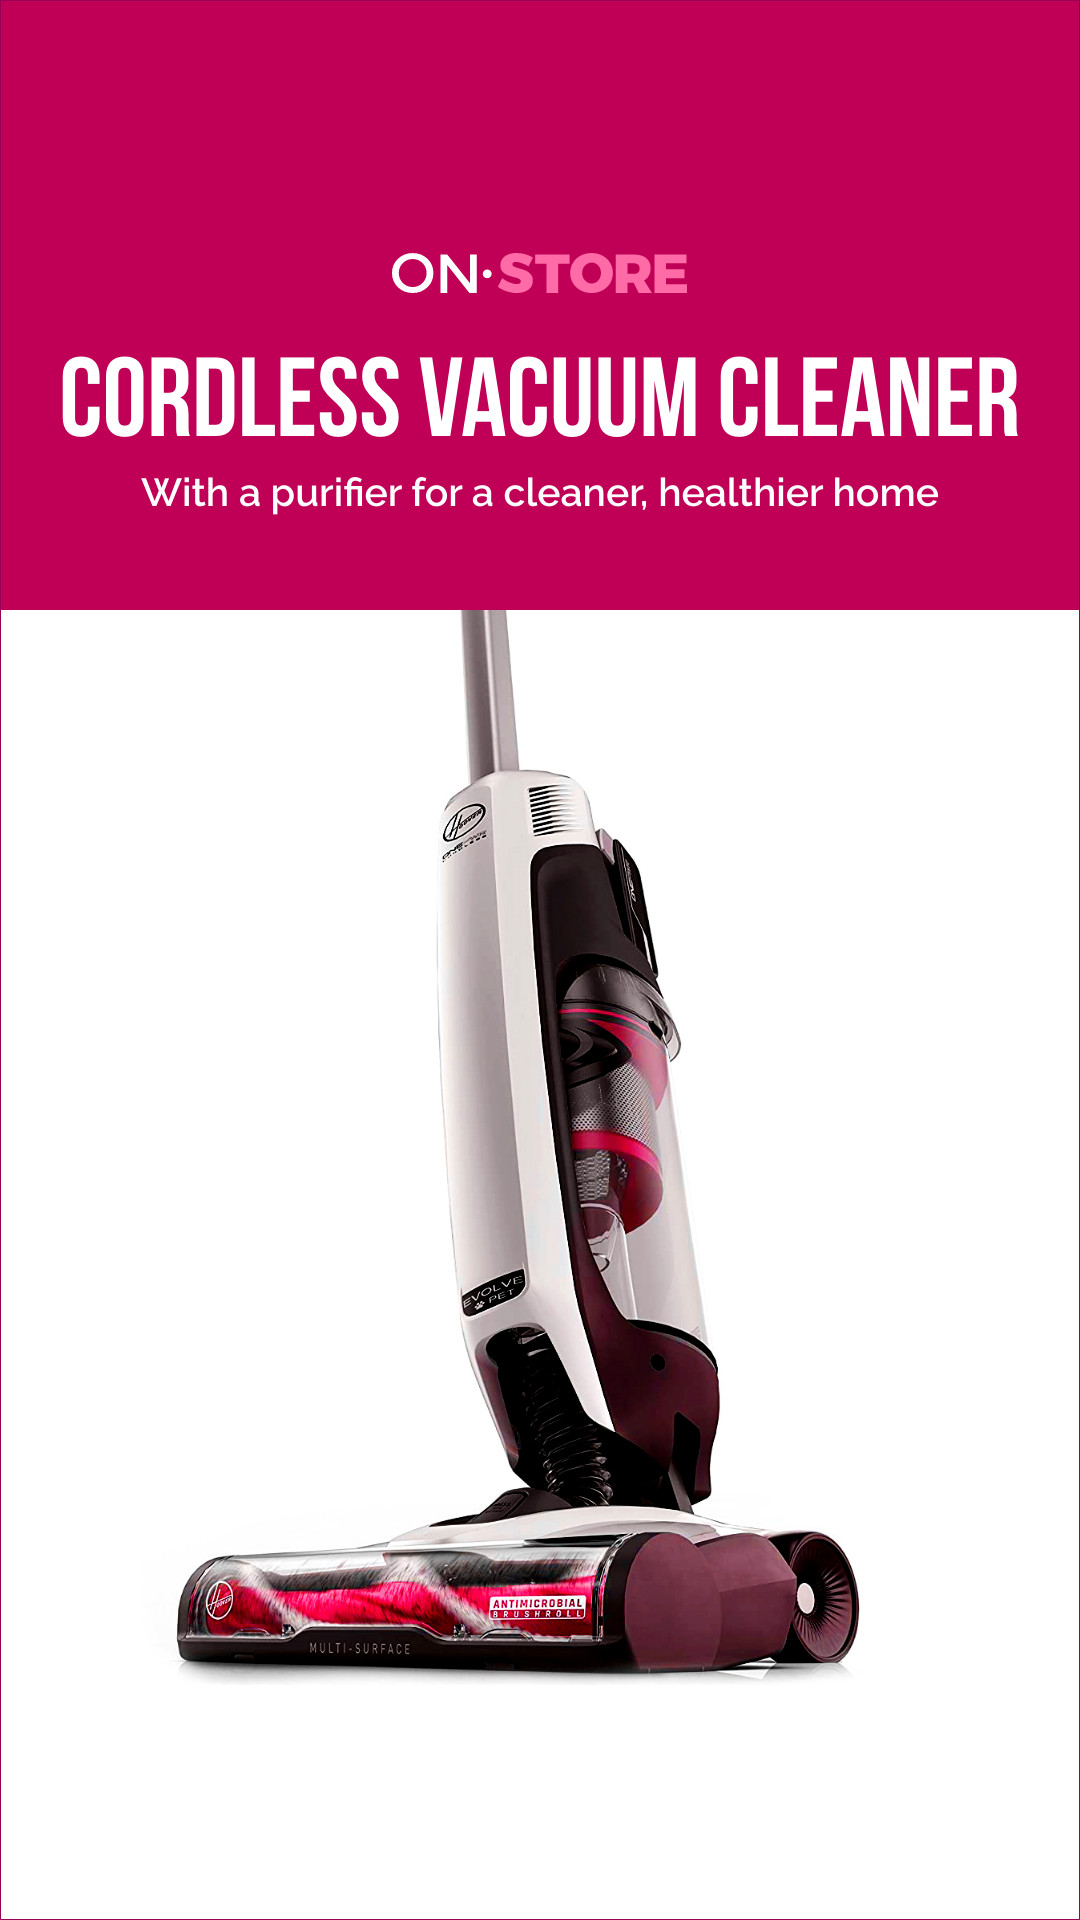 On Store Vacuum Cleaner Offer